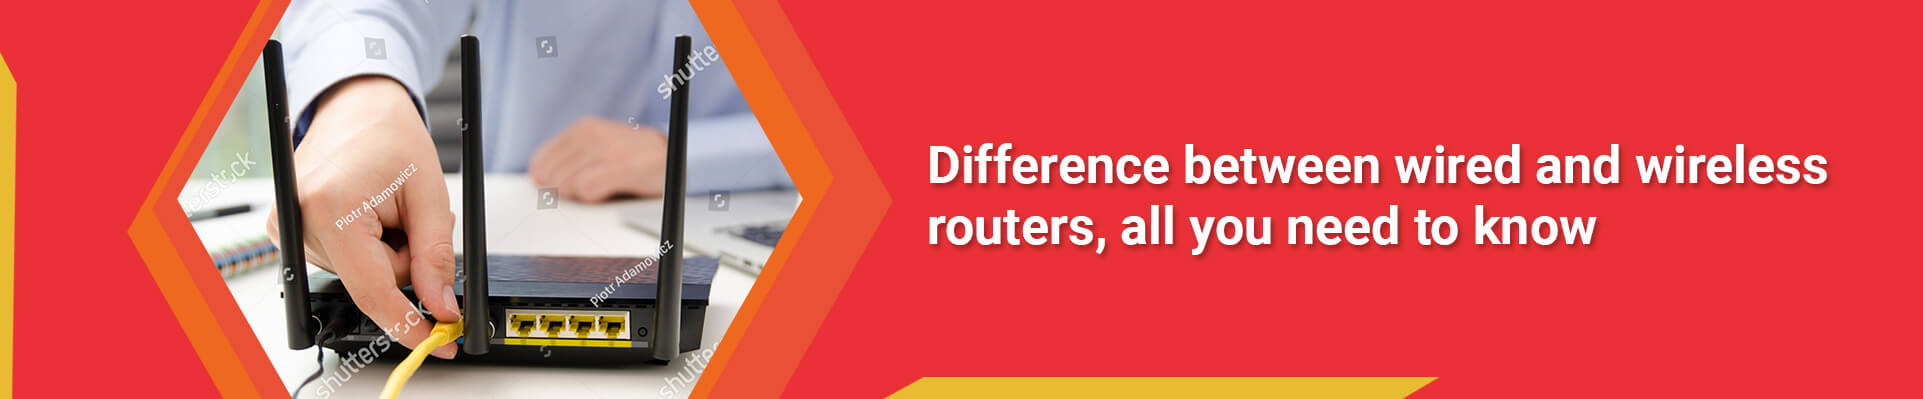 Difference Between a Wireless Router and a Wired Router